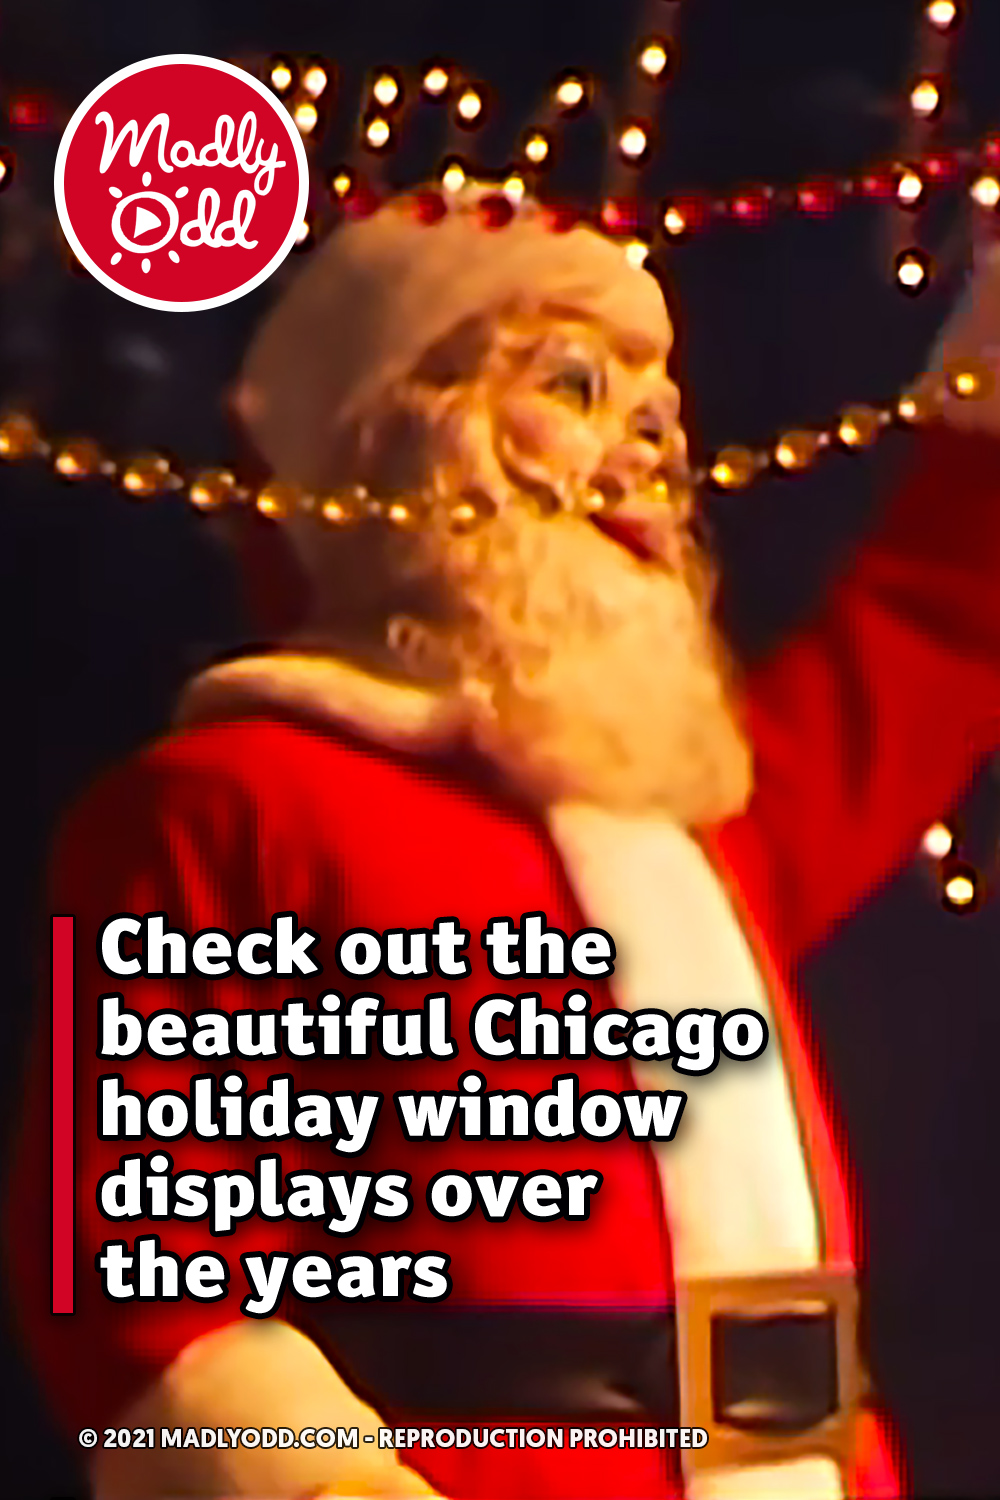 Check out the beautiful Chicago holiday window displays over the years